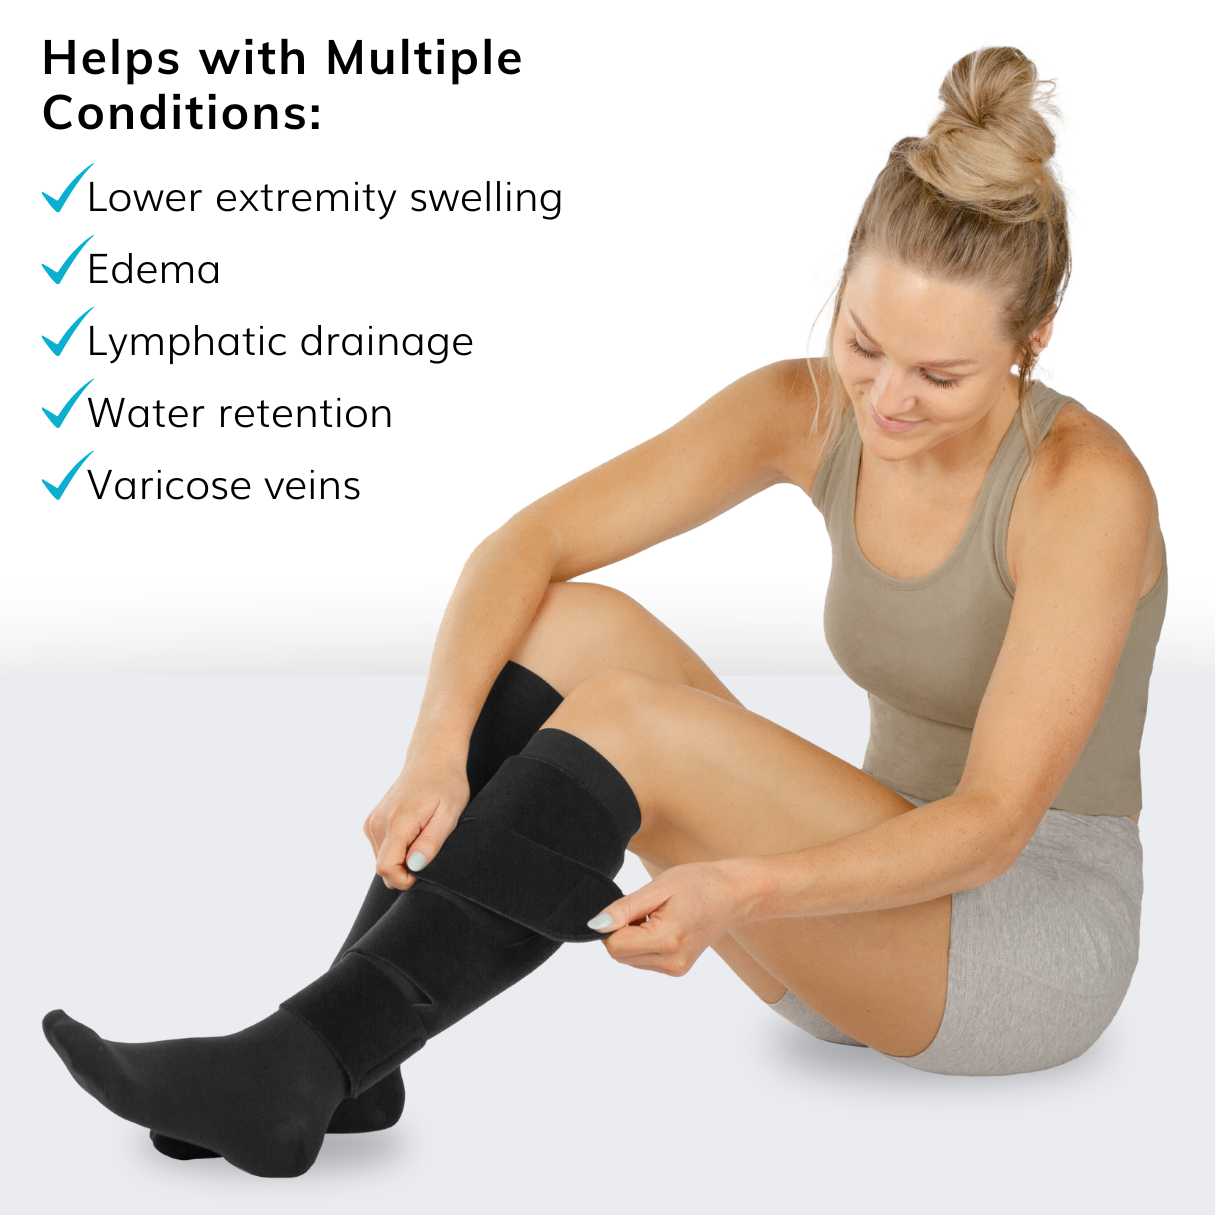 Our obesity lymphedema leg compression sleeve can be used for lymphatic drainage and edema in the lower leg